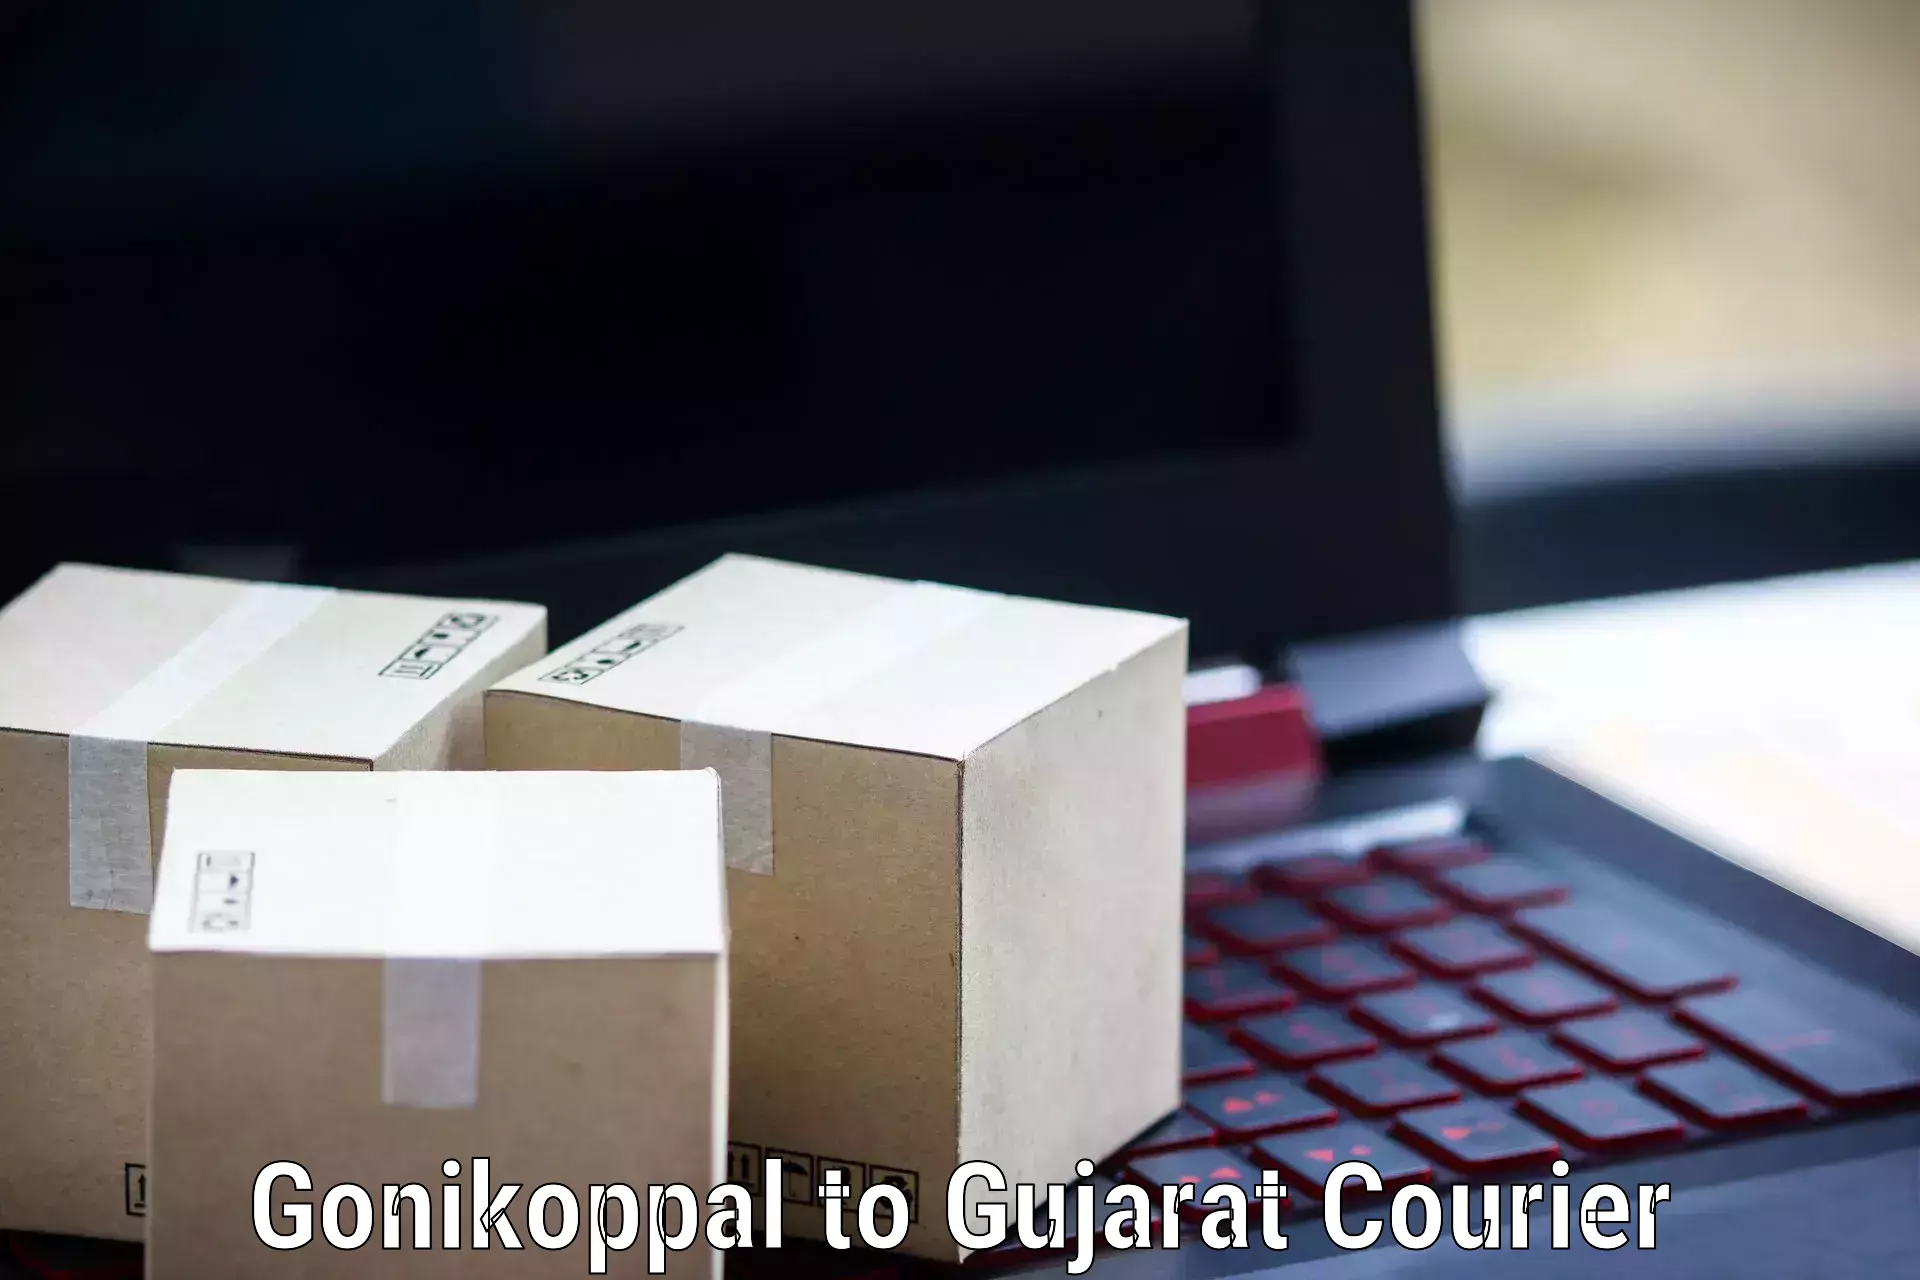 State-of-the-art courier technology Gonikoppal to Karjan